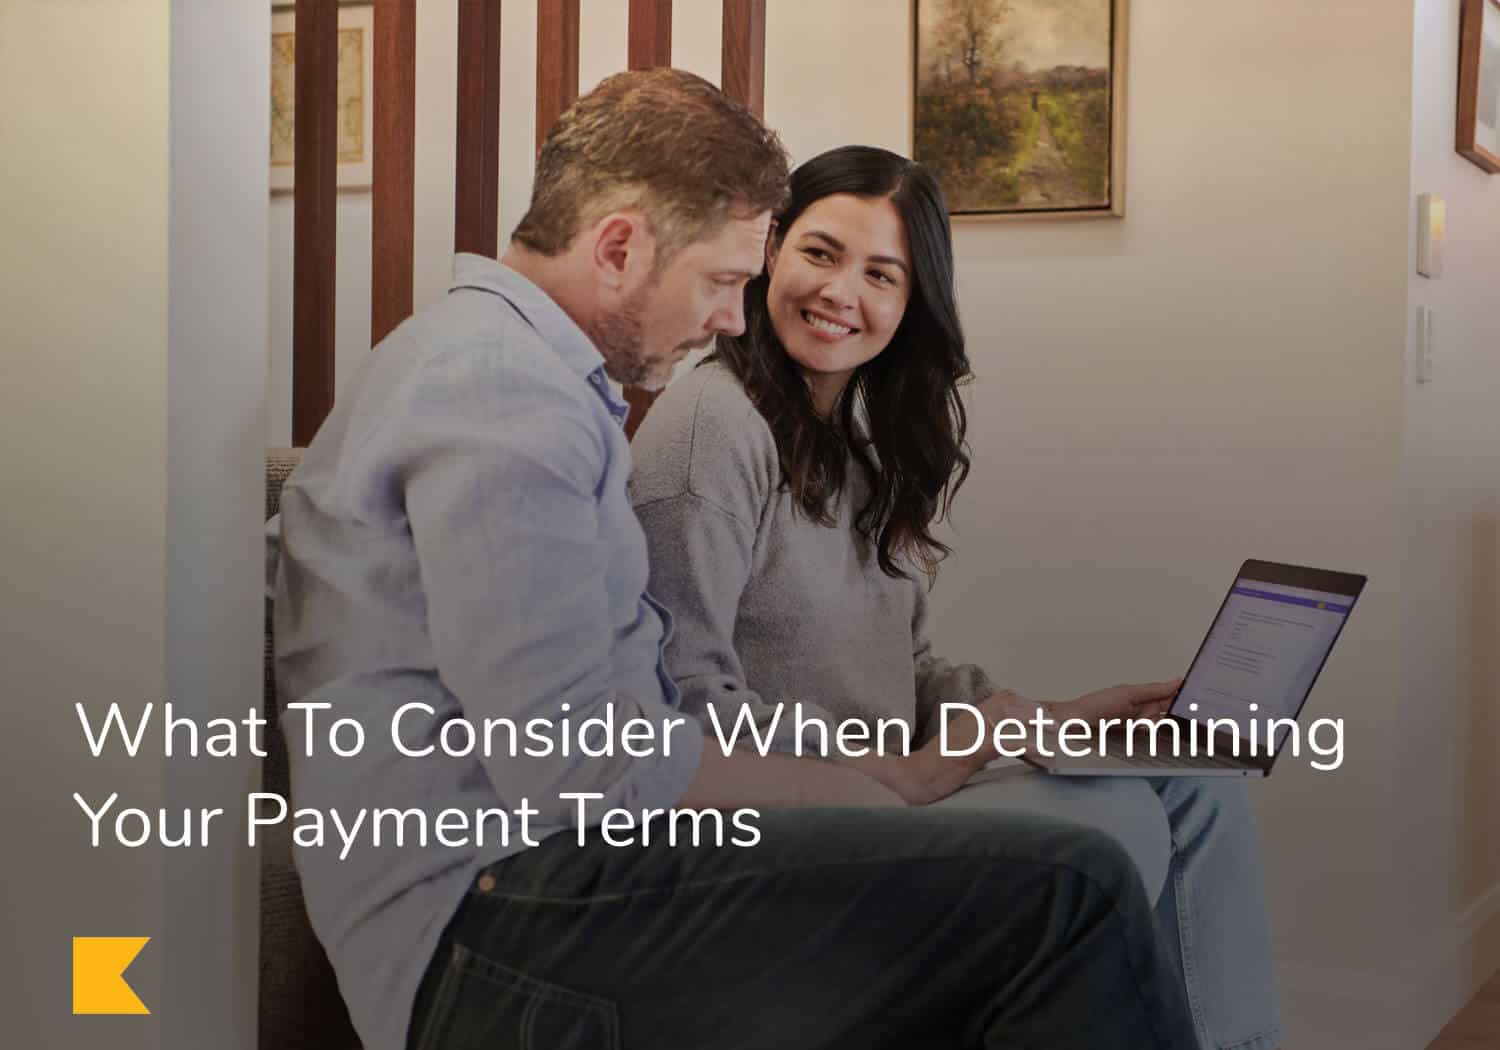 What To Consider When Determining Your Payment Terms